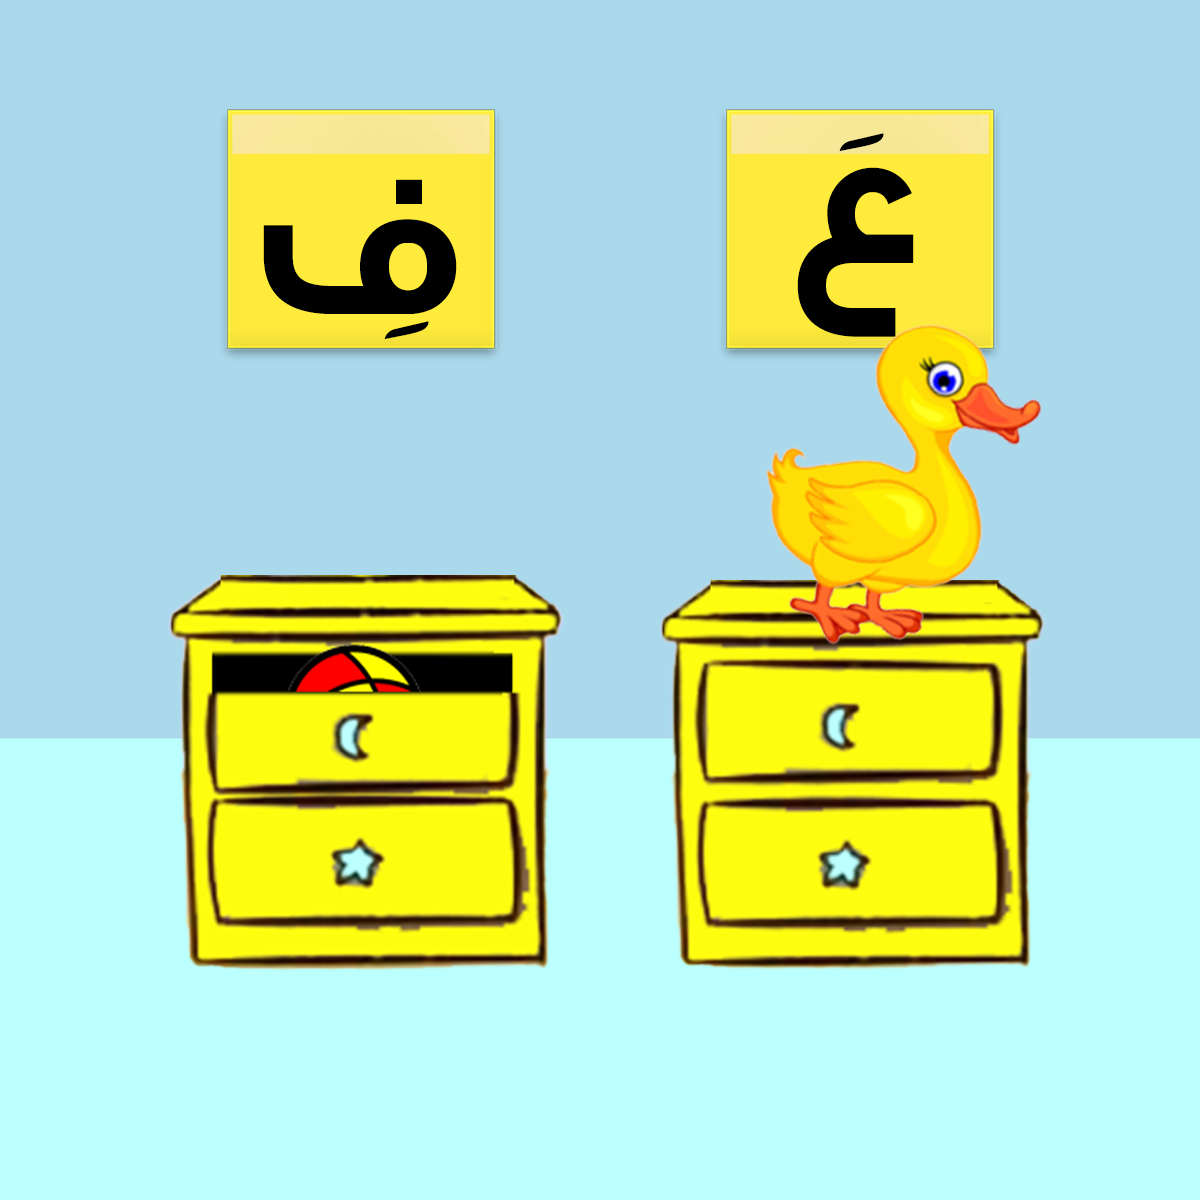 Speak Egyptian Arabic!  Explore + Build + Create | Beginner 1 | Small Group Online Class, Pay Weekly